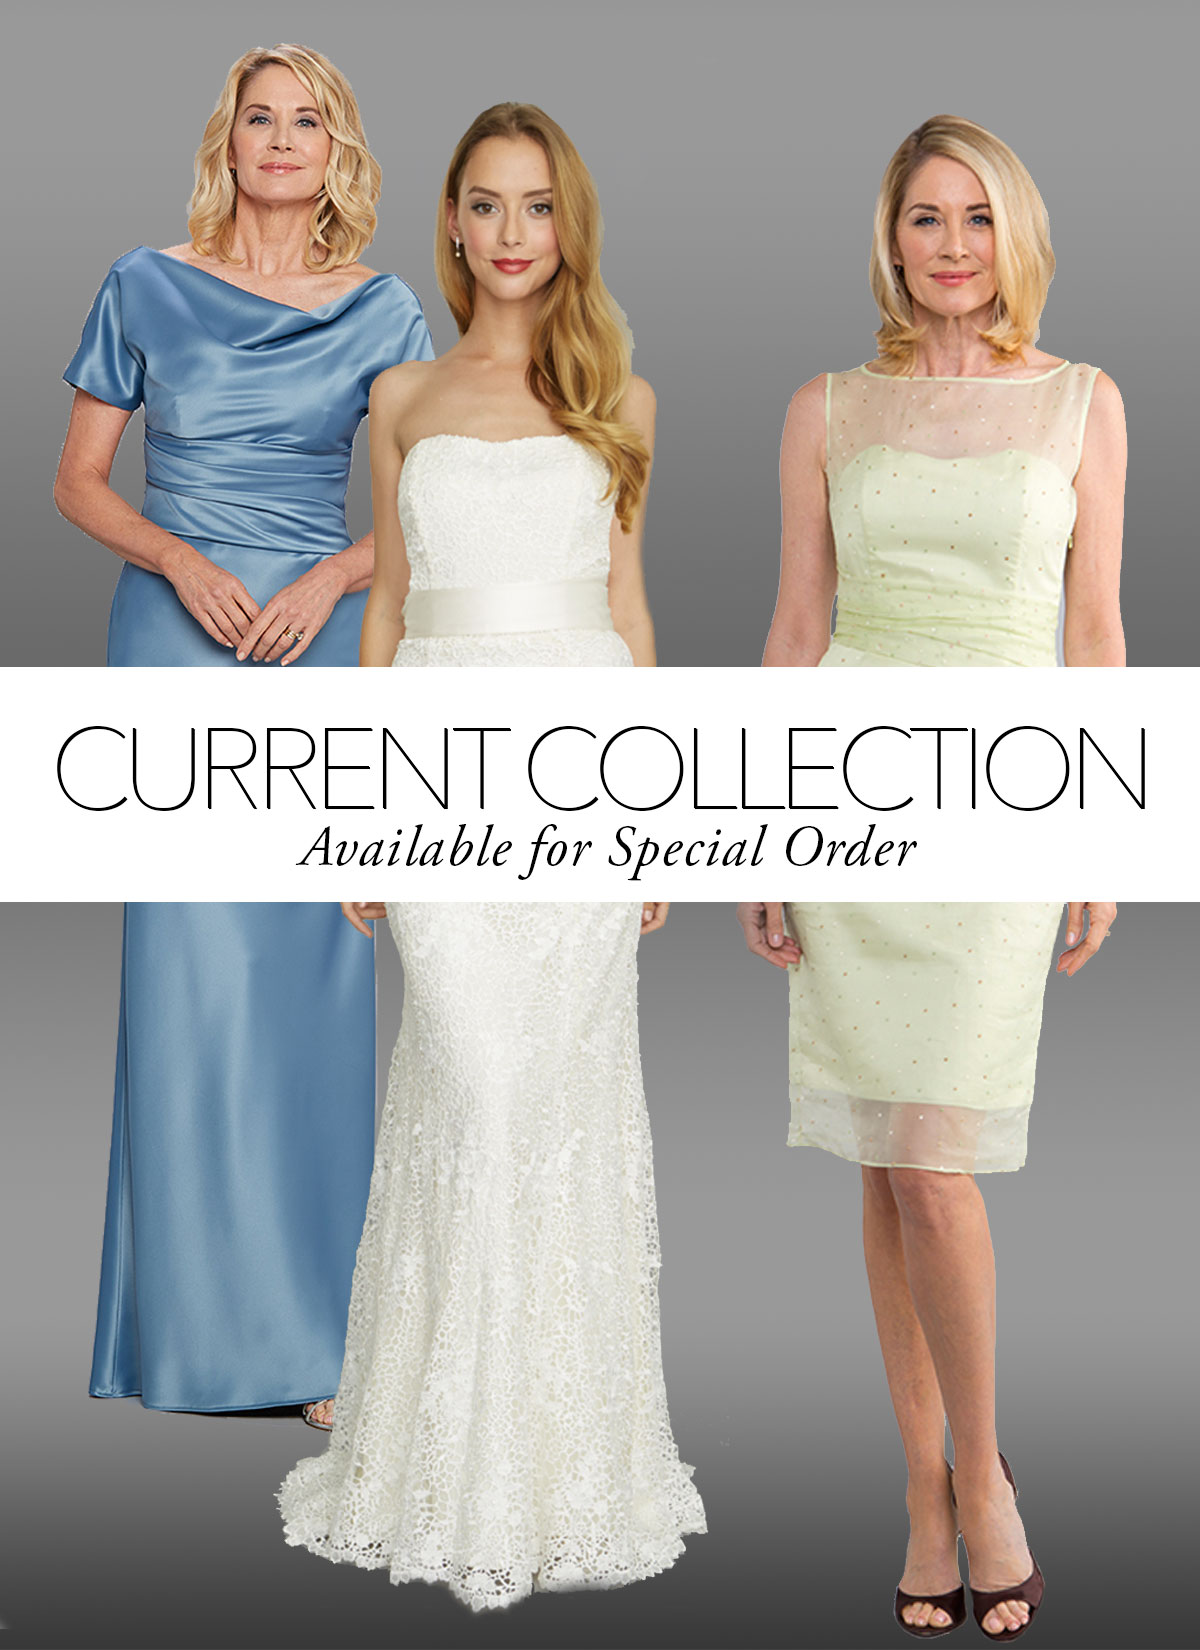 mother of the bride 2018 collections